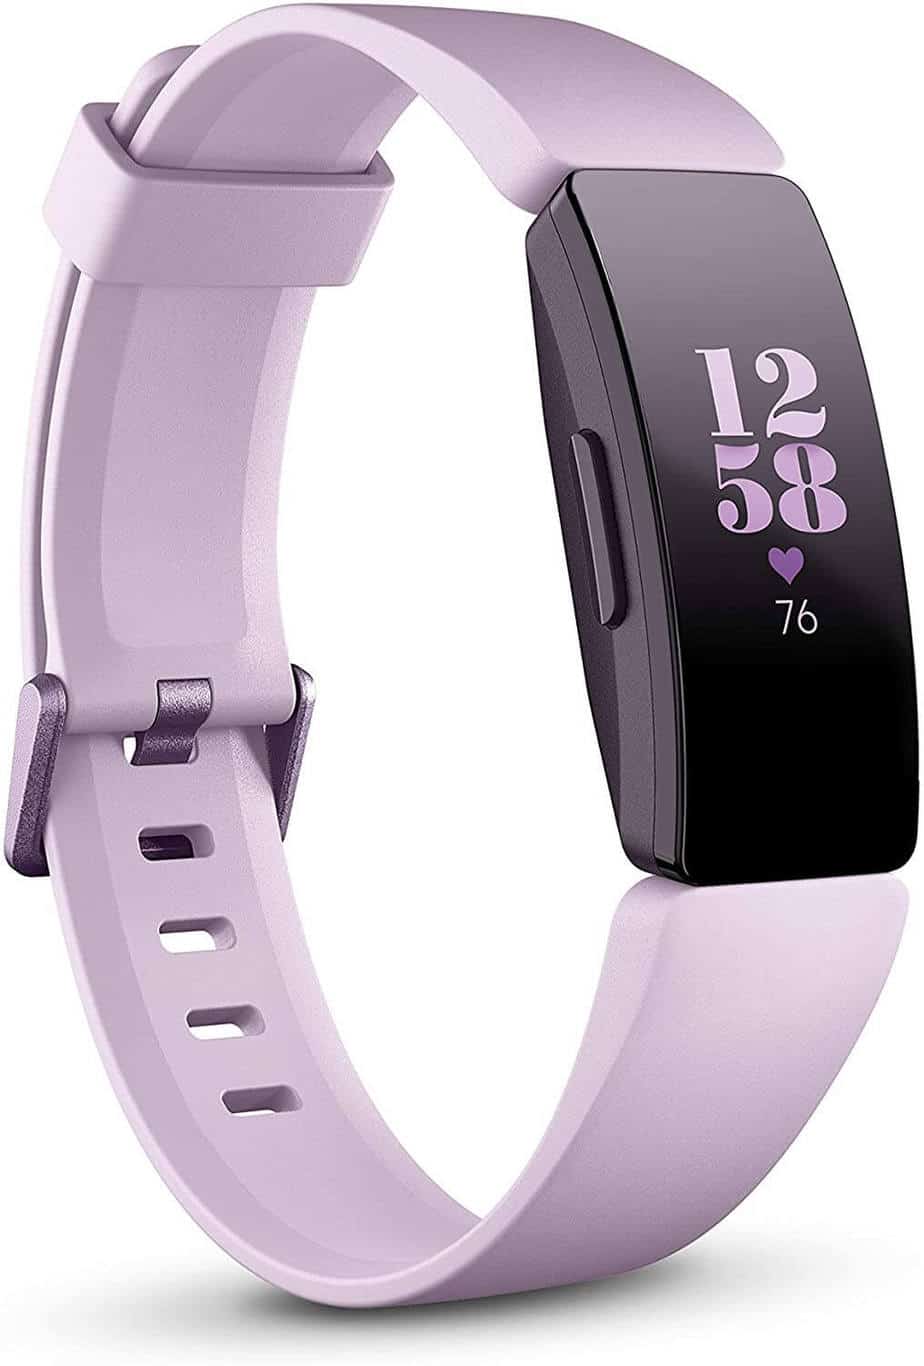 Fitbit inspire HR heart rate and fitness tracker